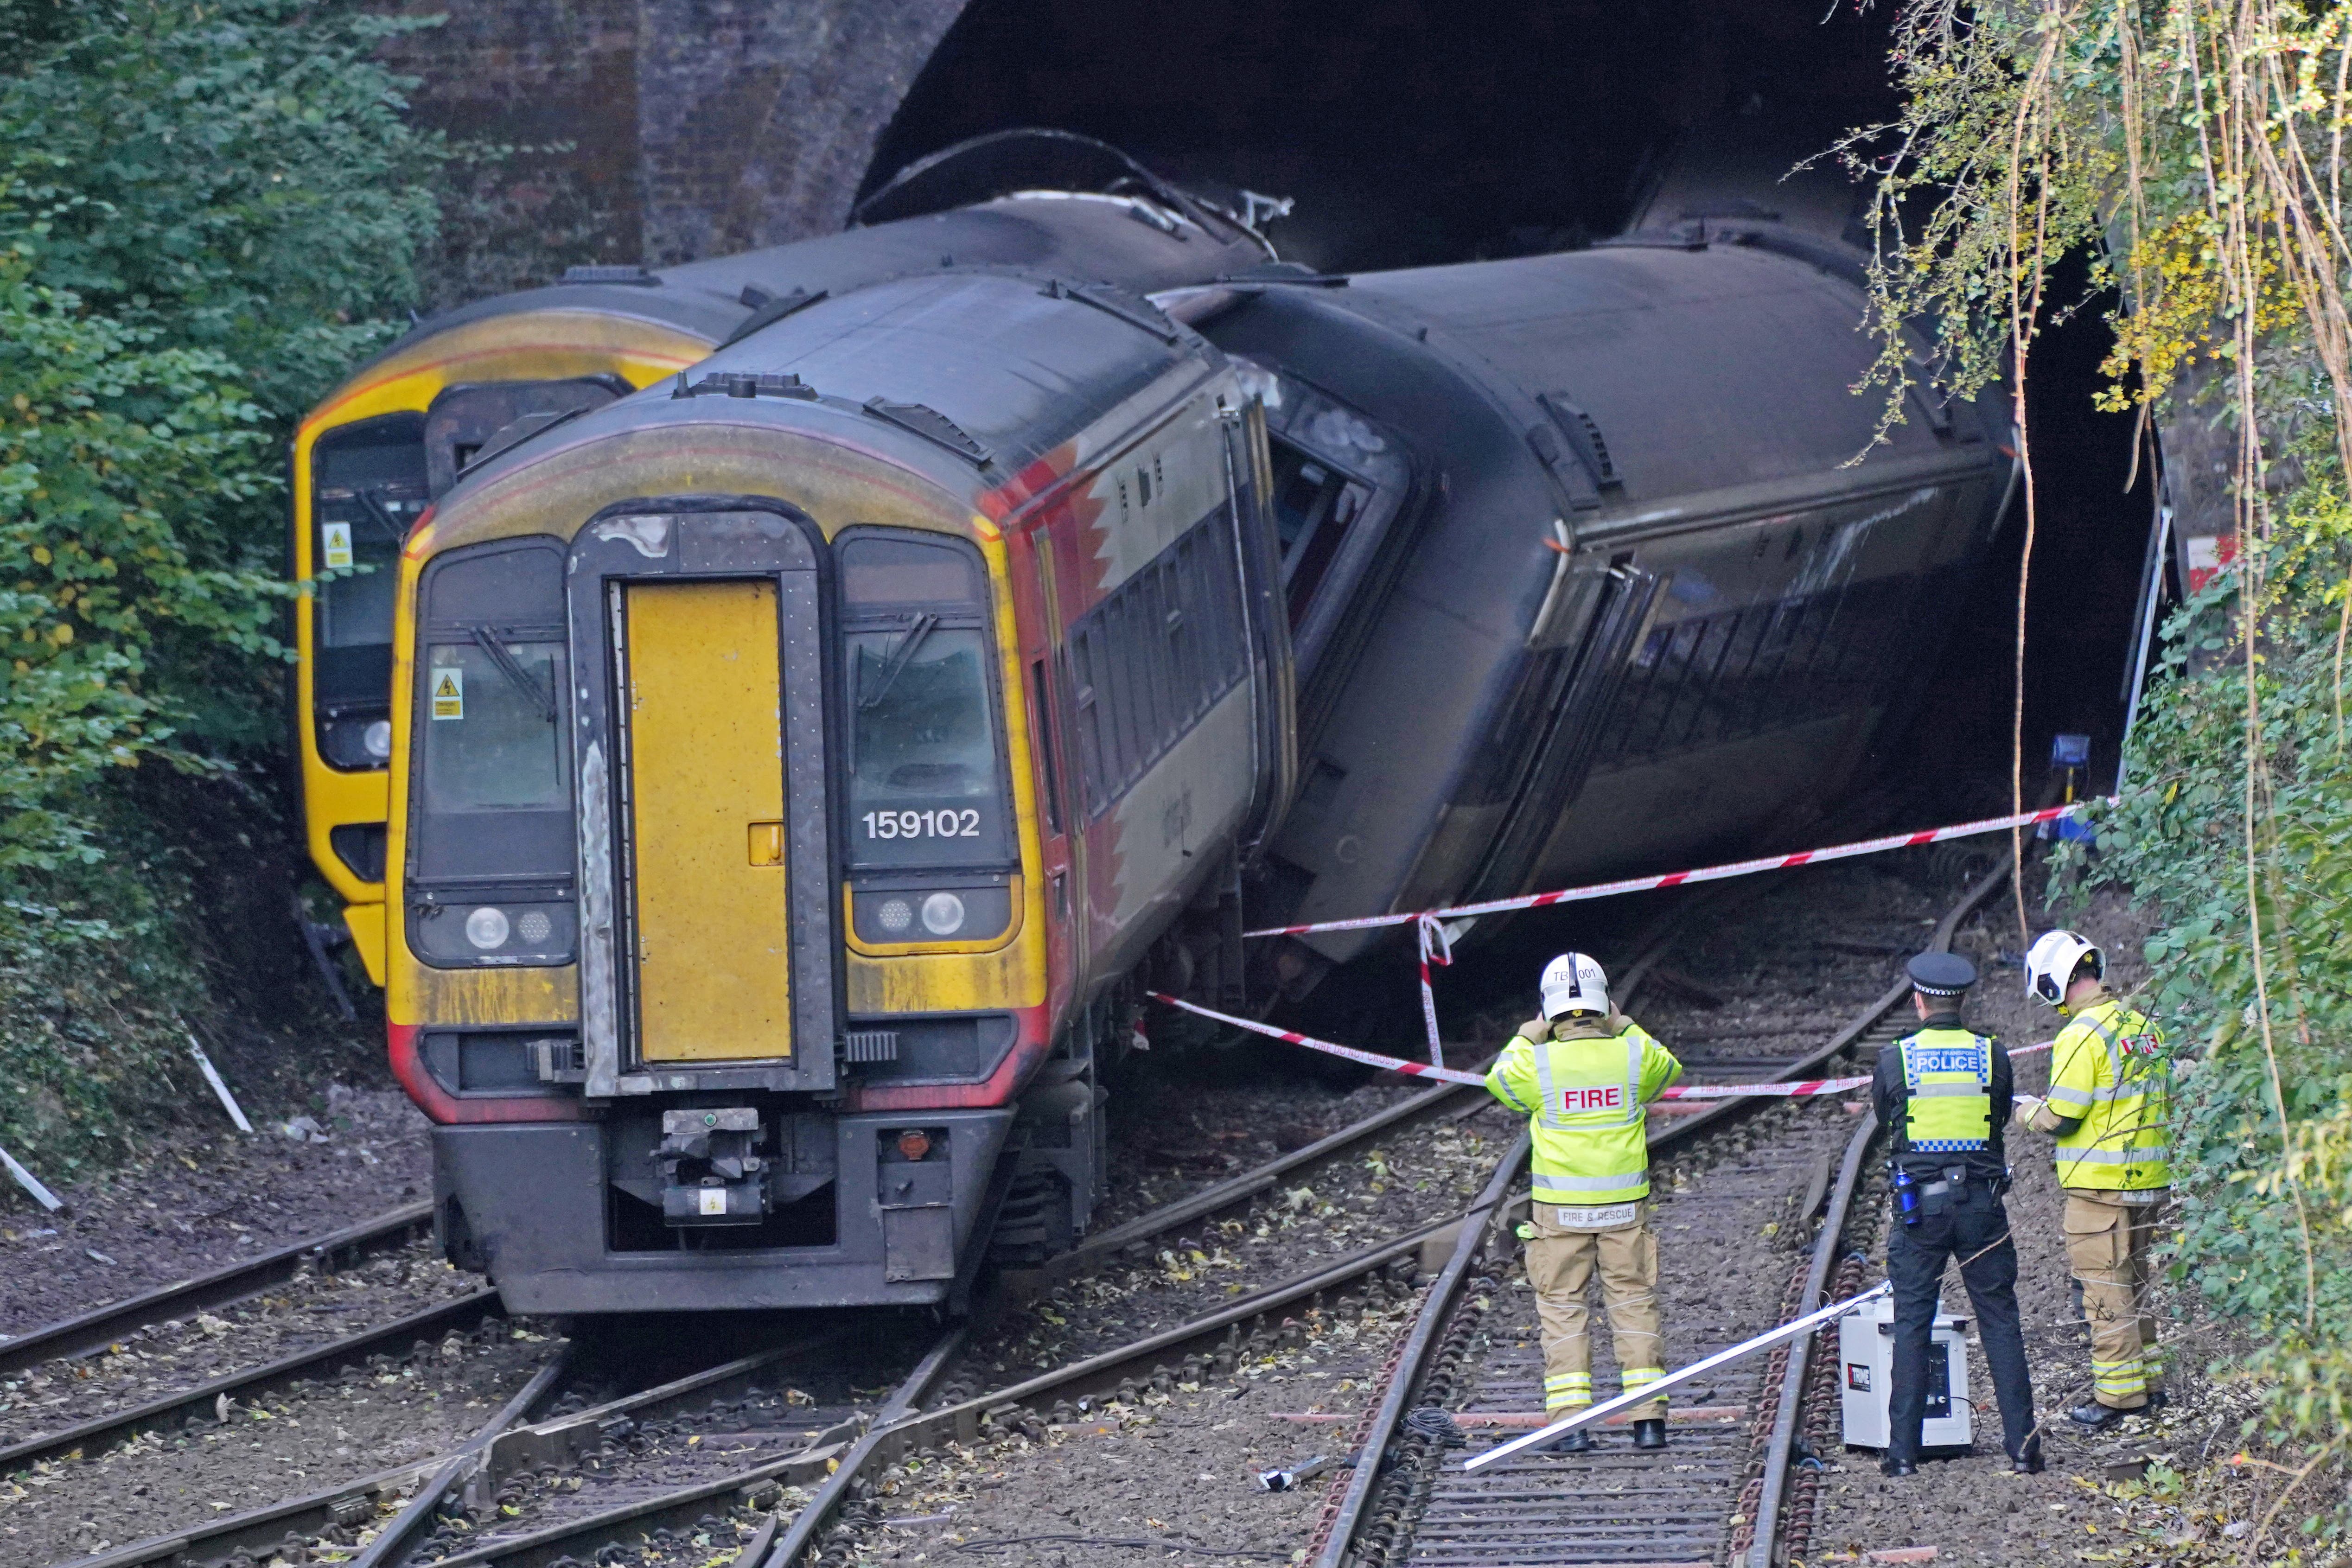 The crash was the most serious between two passenger trains since the RAIB’s inception